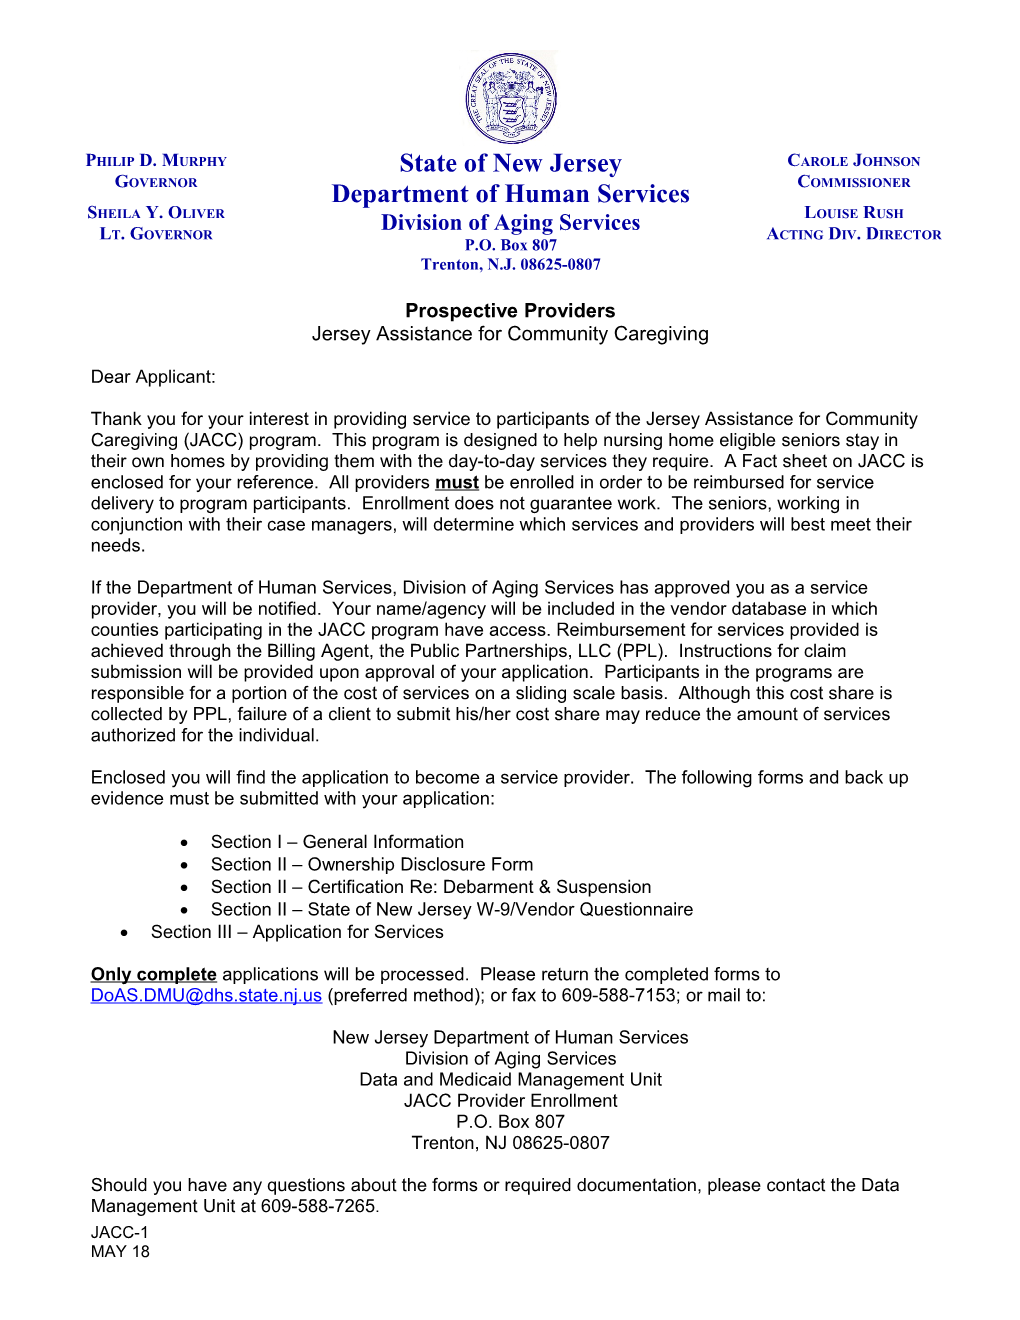 DHSS Letterhead, PO 807, Aging and Community Services